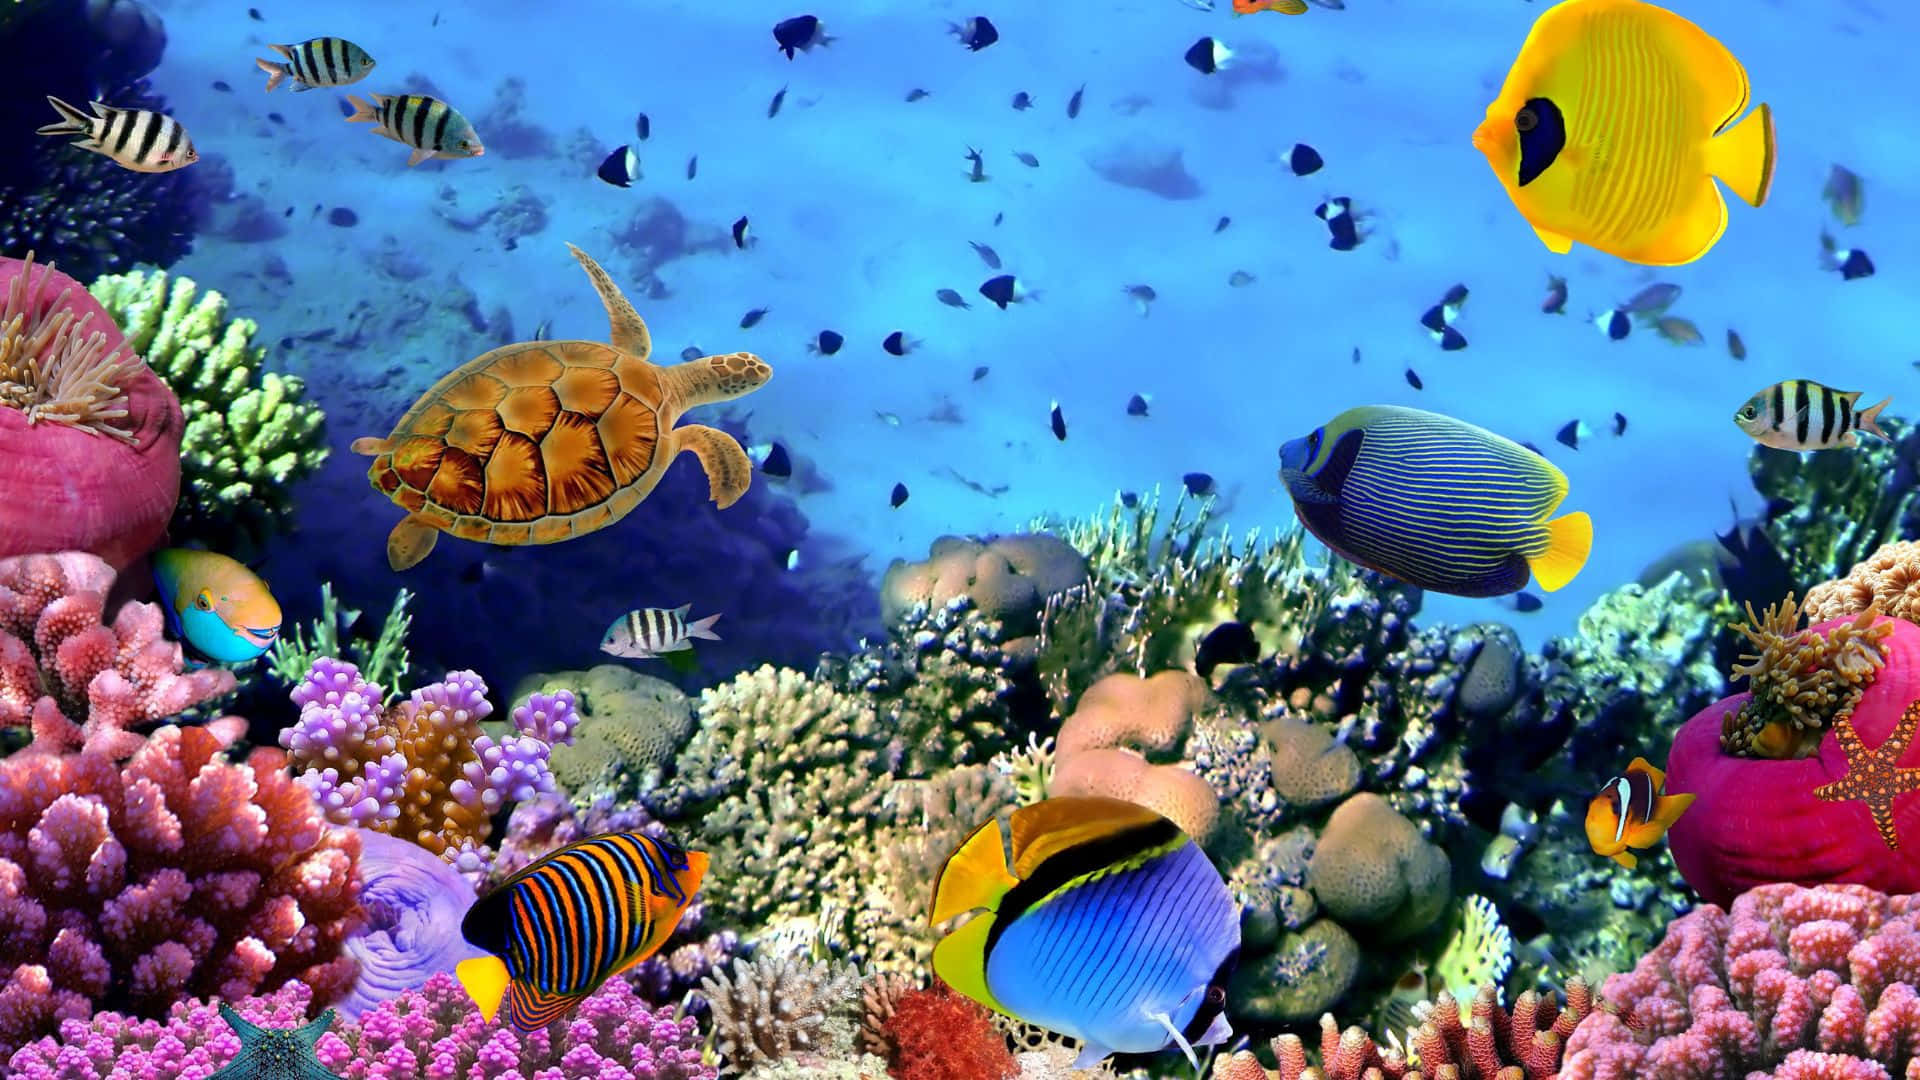 A Colorful Coral Reef With Many Fish And Turtles